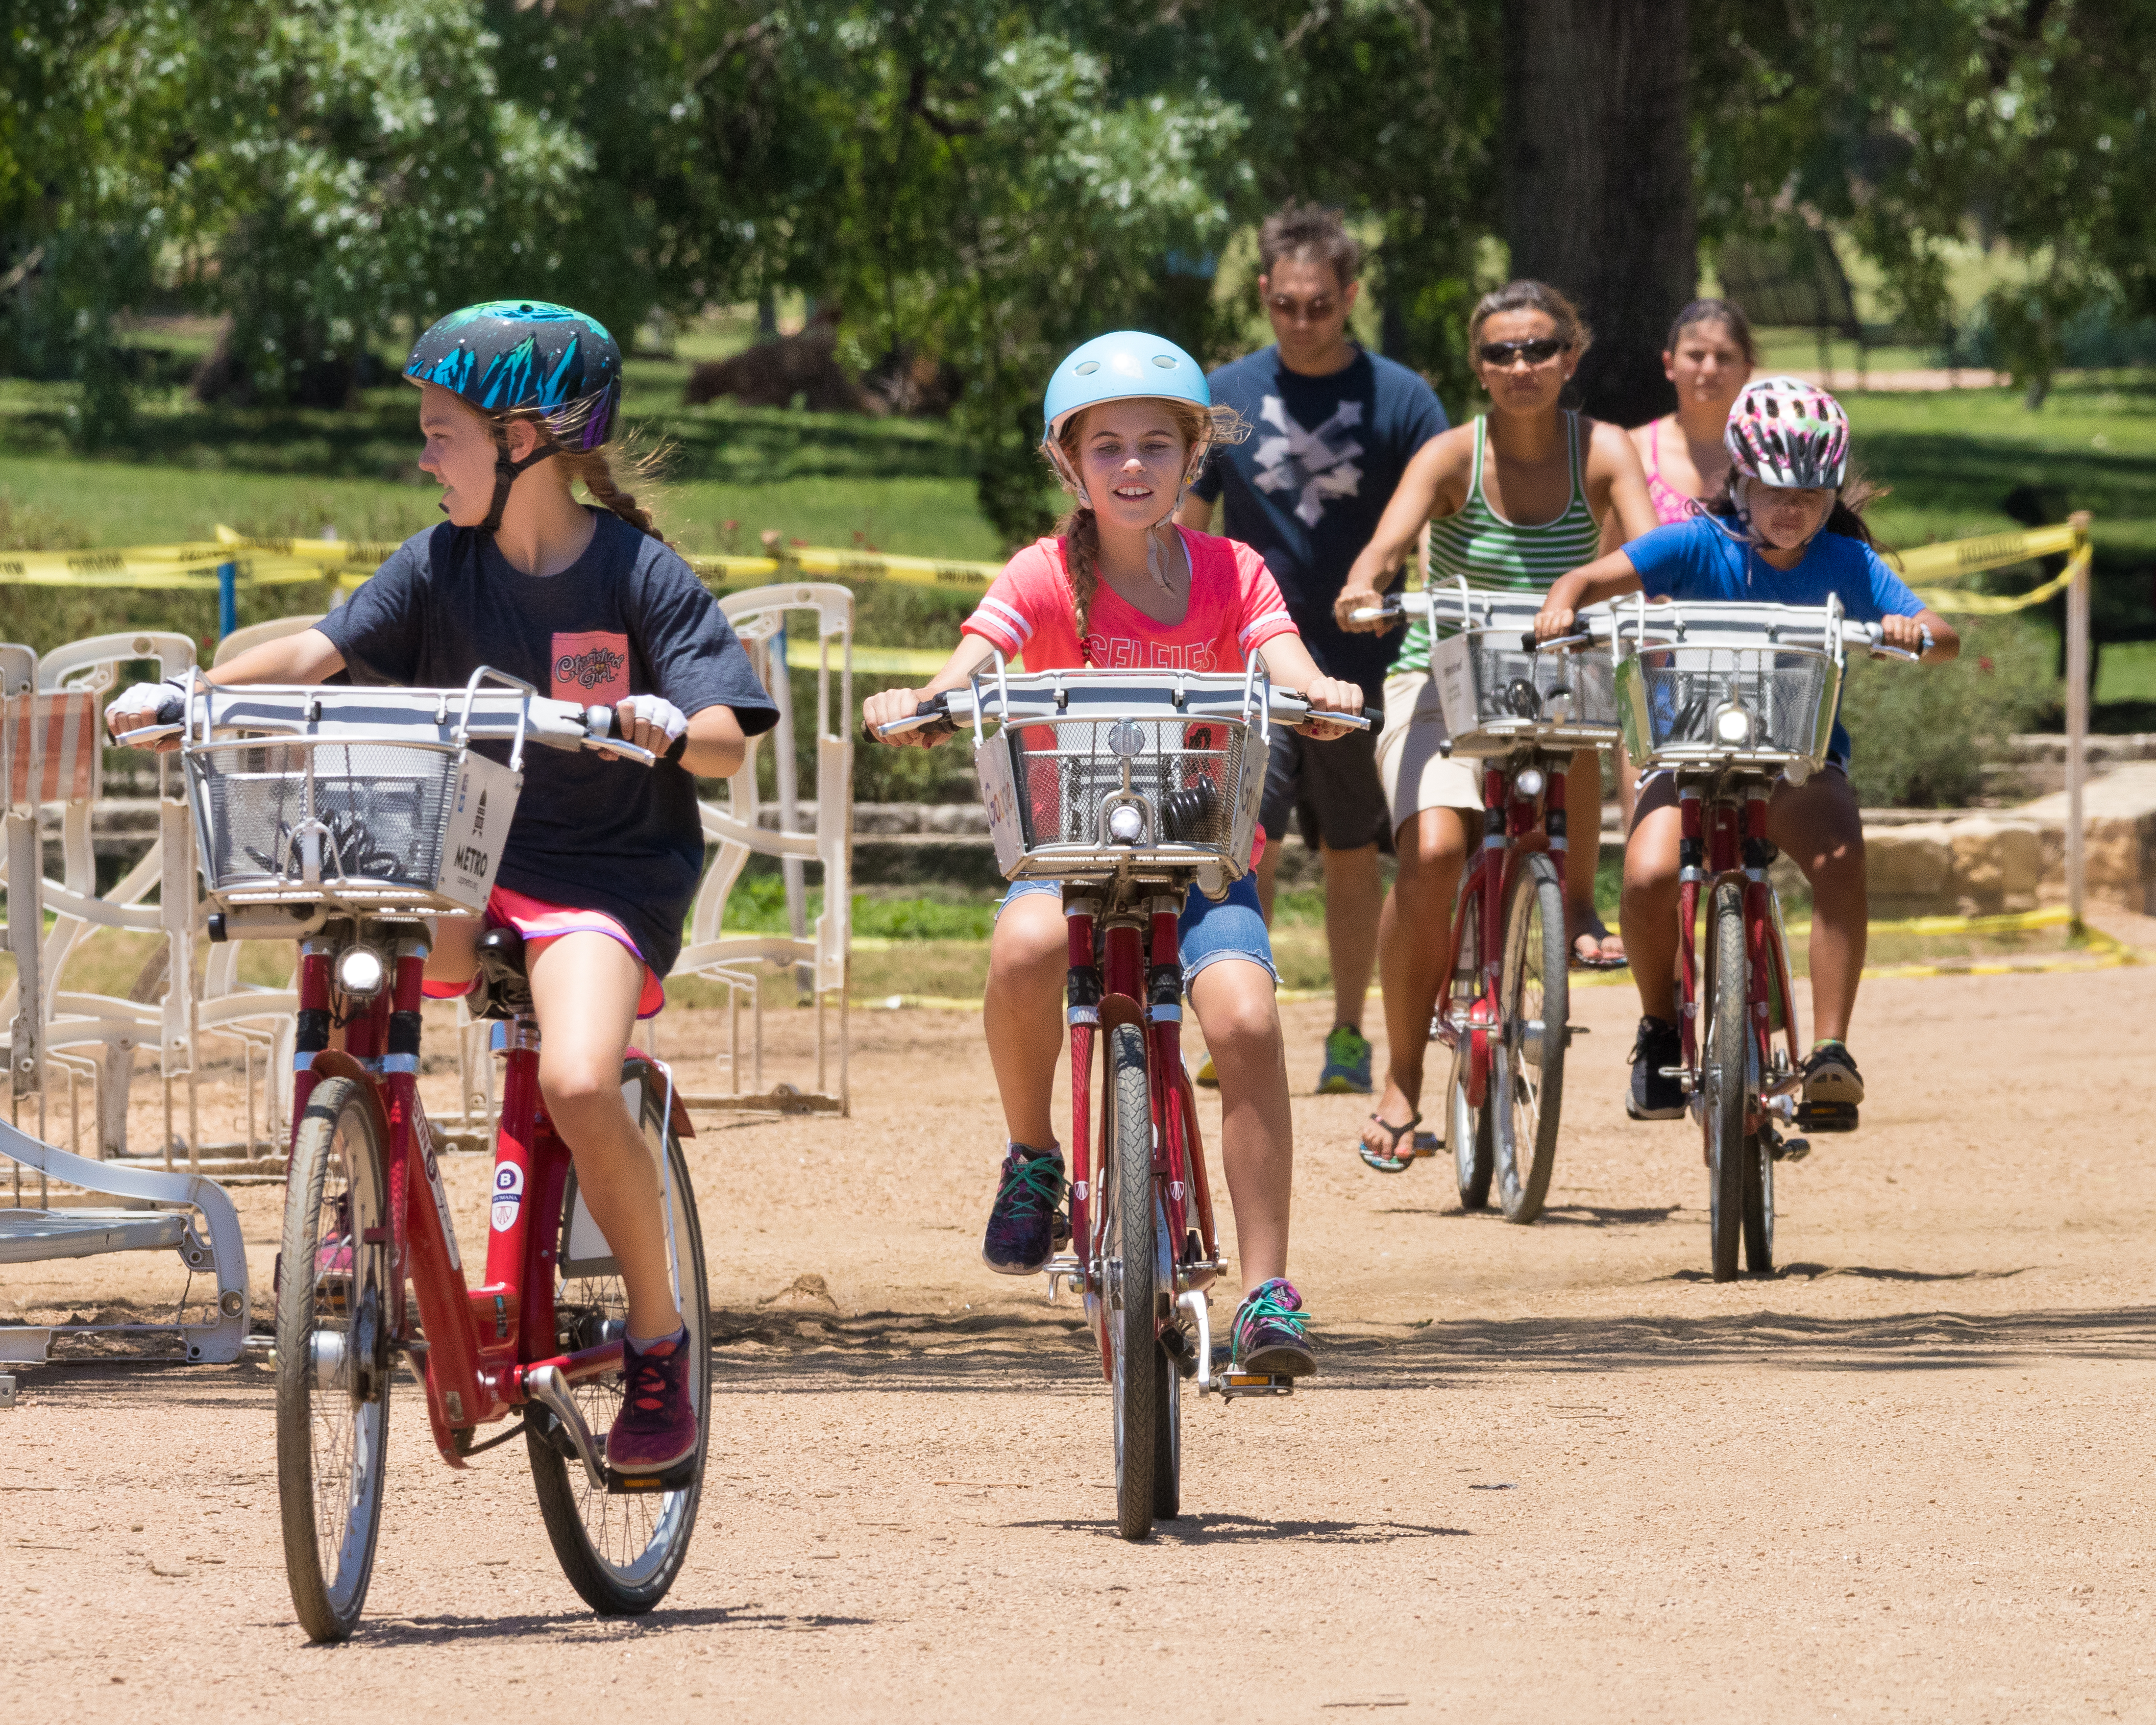 Kids and adults on similar bikes with baskets on a crushed granite trail. The bikes are part of Austin’s B-cycle rental program.